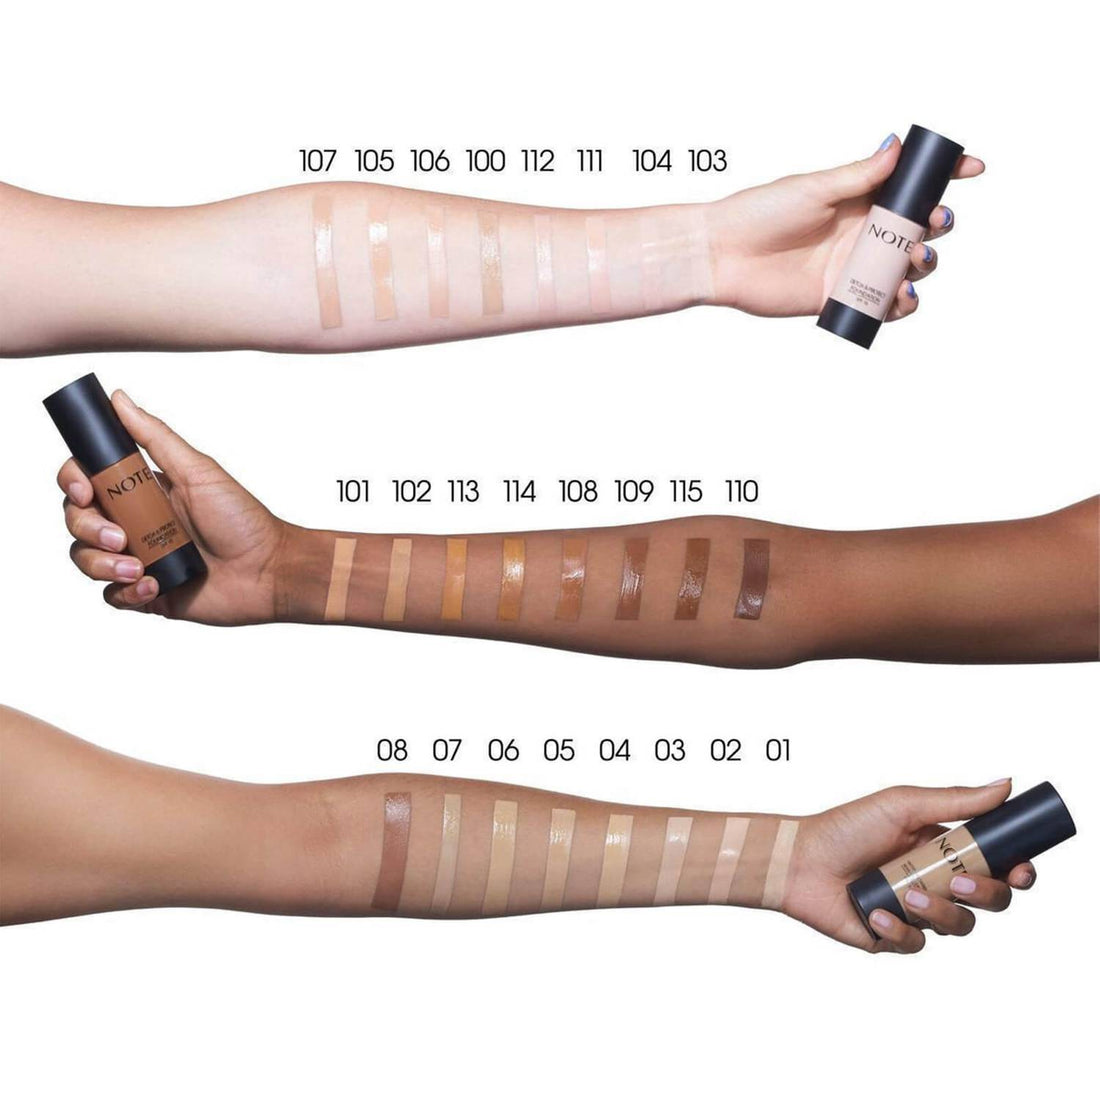 Swatches of NOTE Detox & Protect Foundation on models' arms